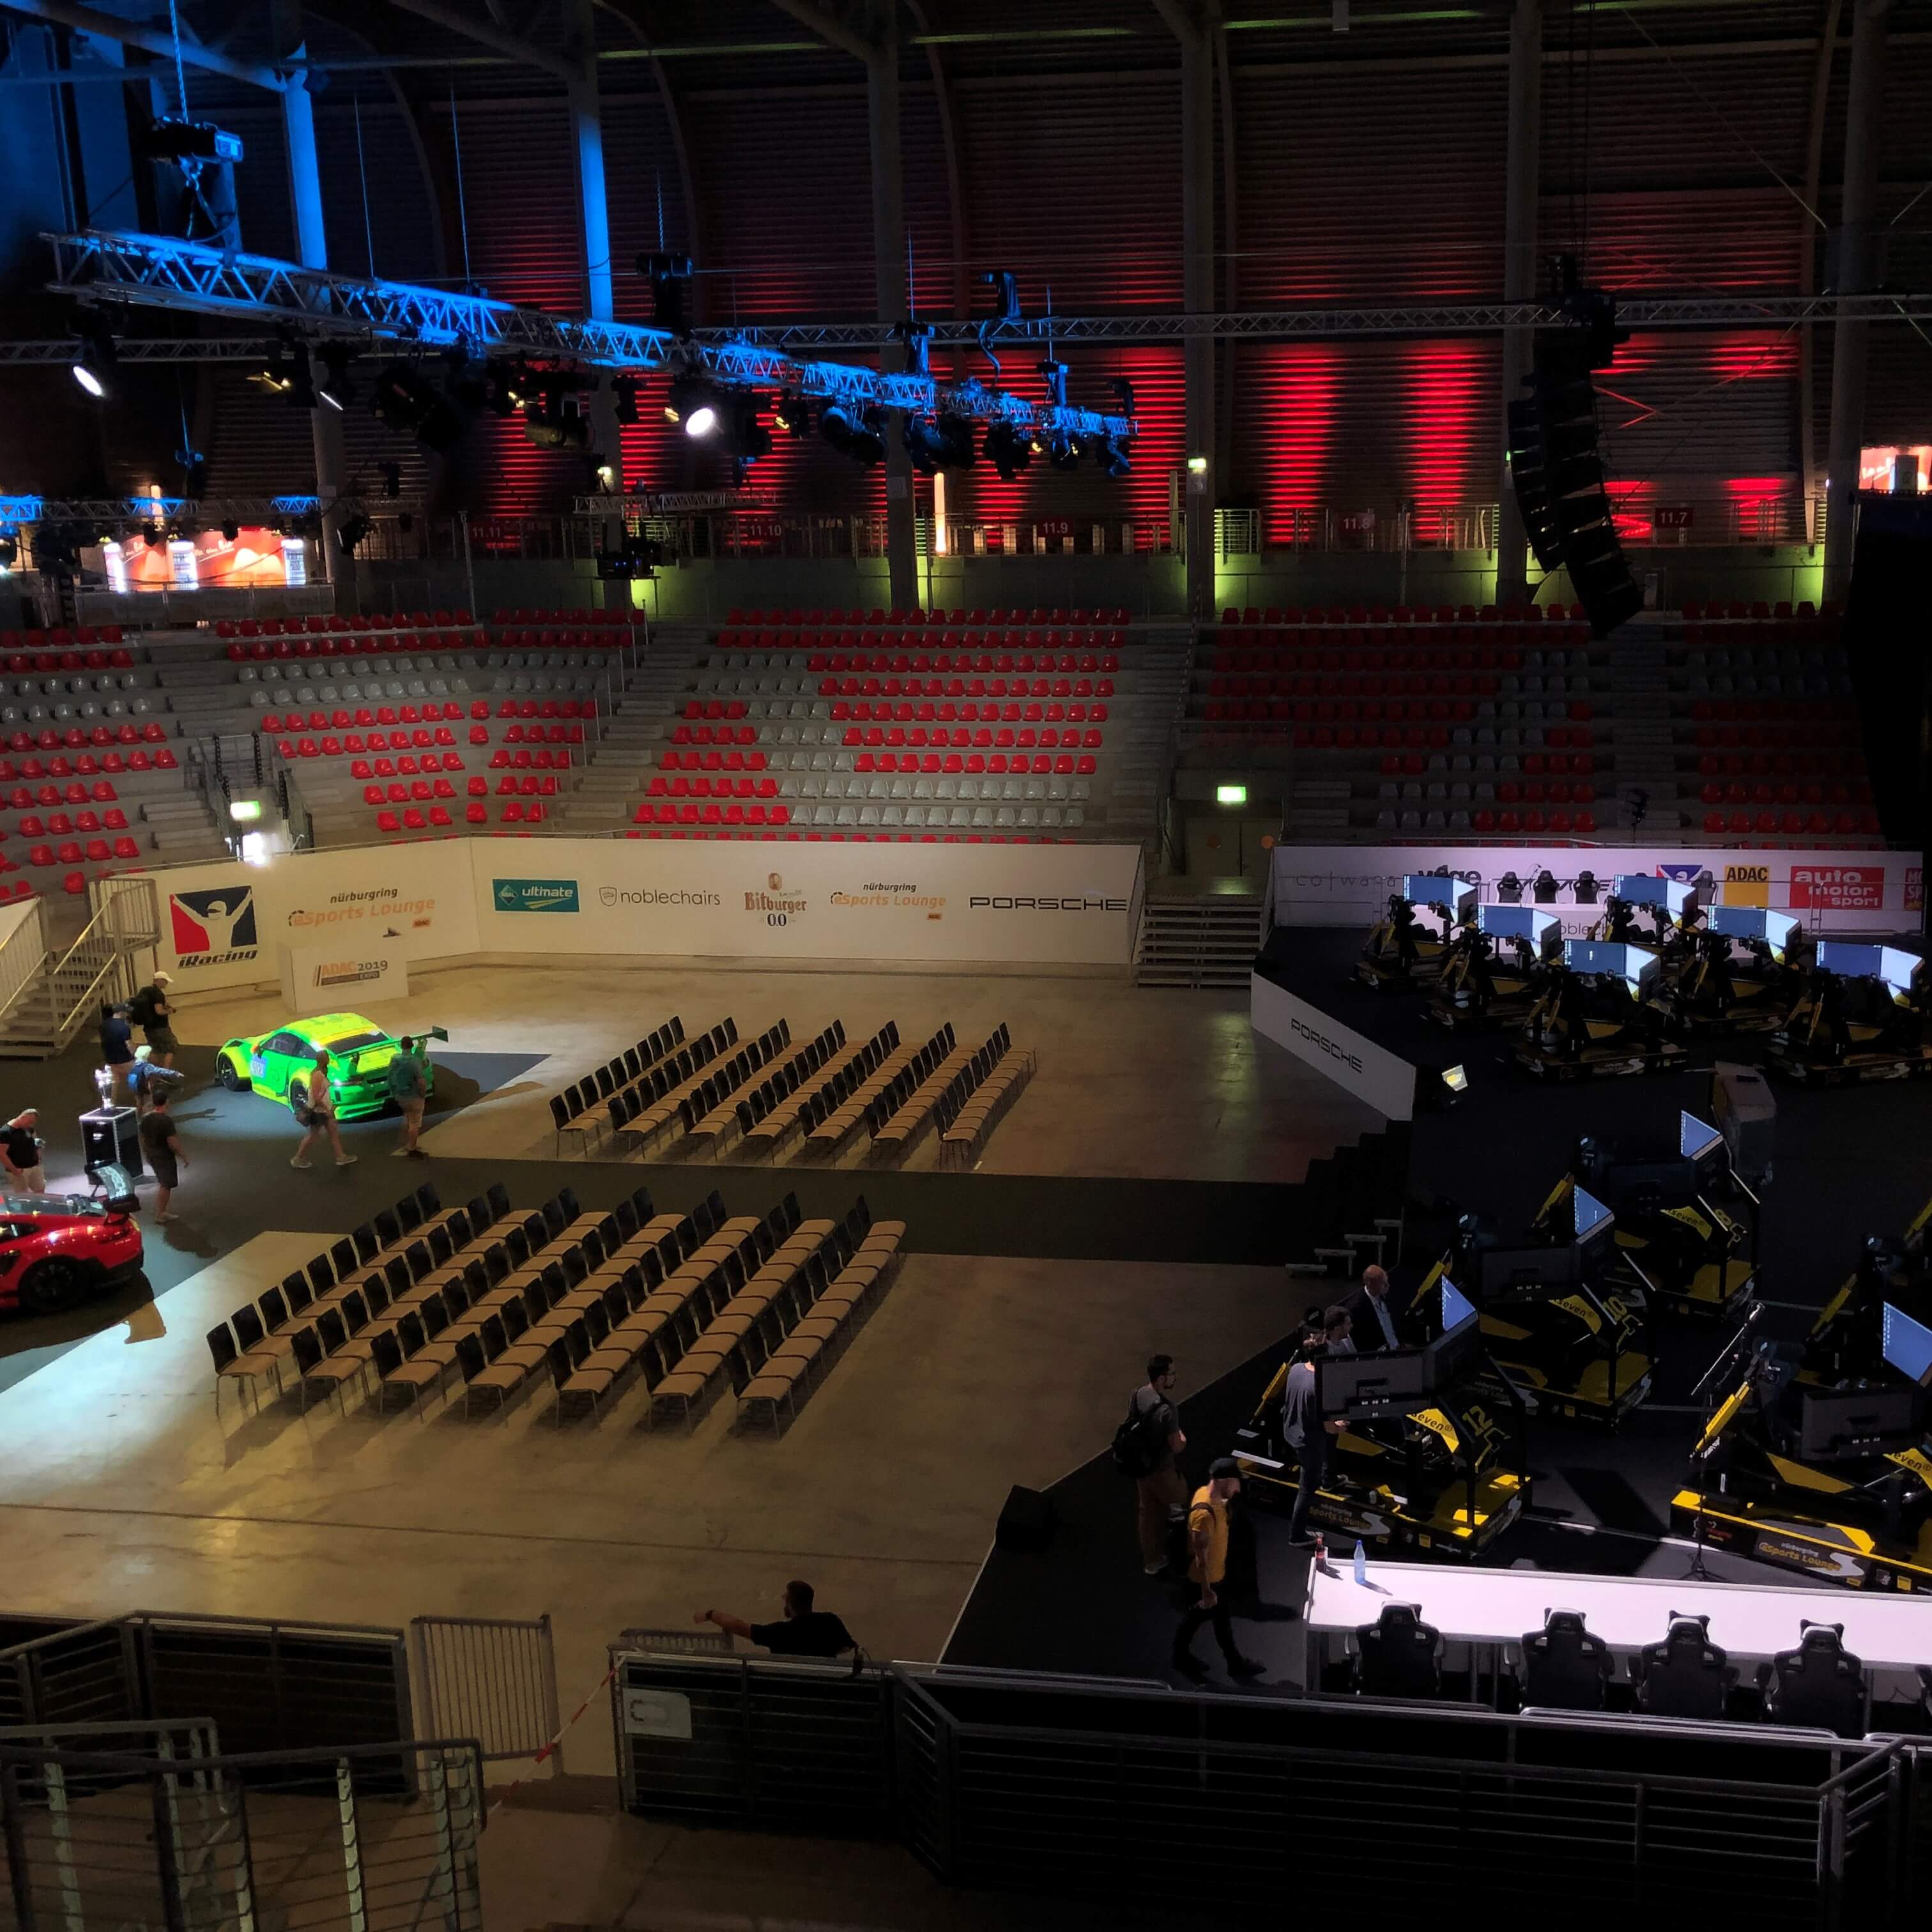 A sim racing event is set up in an empty auditorium